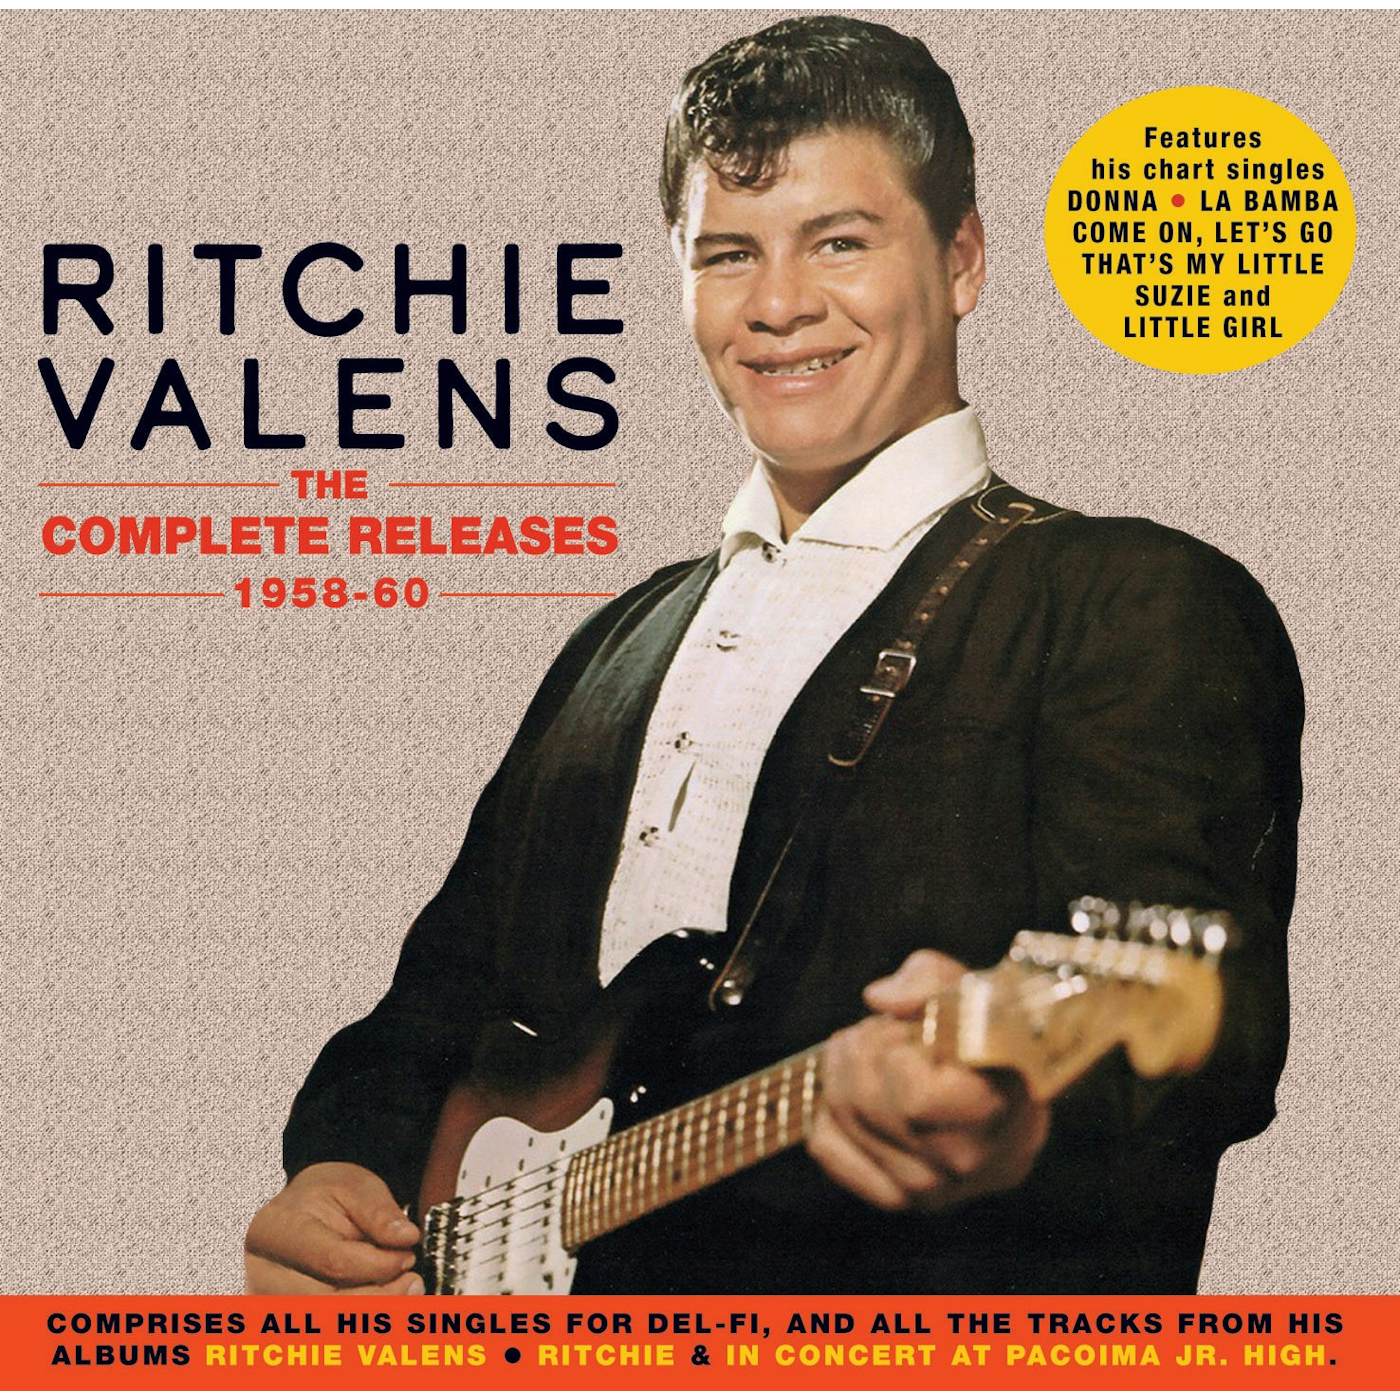 Ritchie Valens COMPLETE RELEASES 1958-60 CD